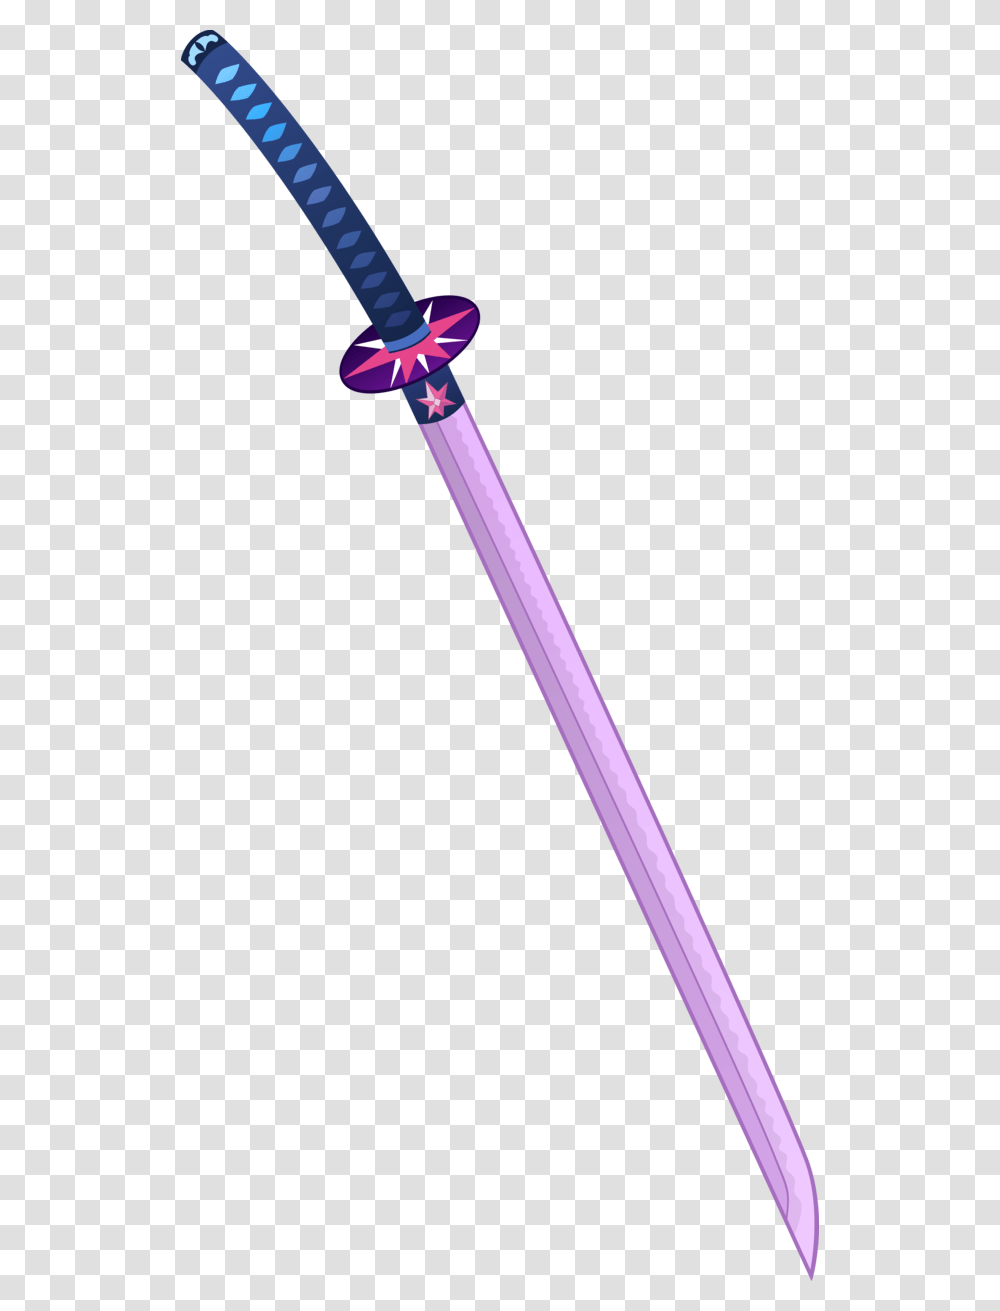 Mlp Twilight Sword, Weapon, Weaponry, Blade, Wand Transparent Png